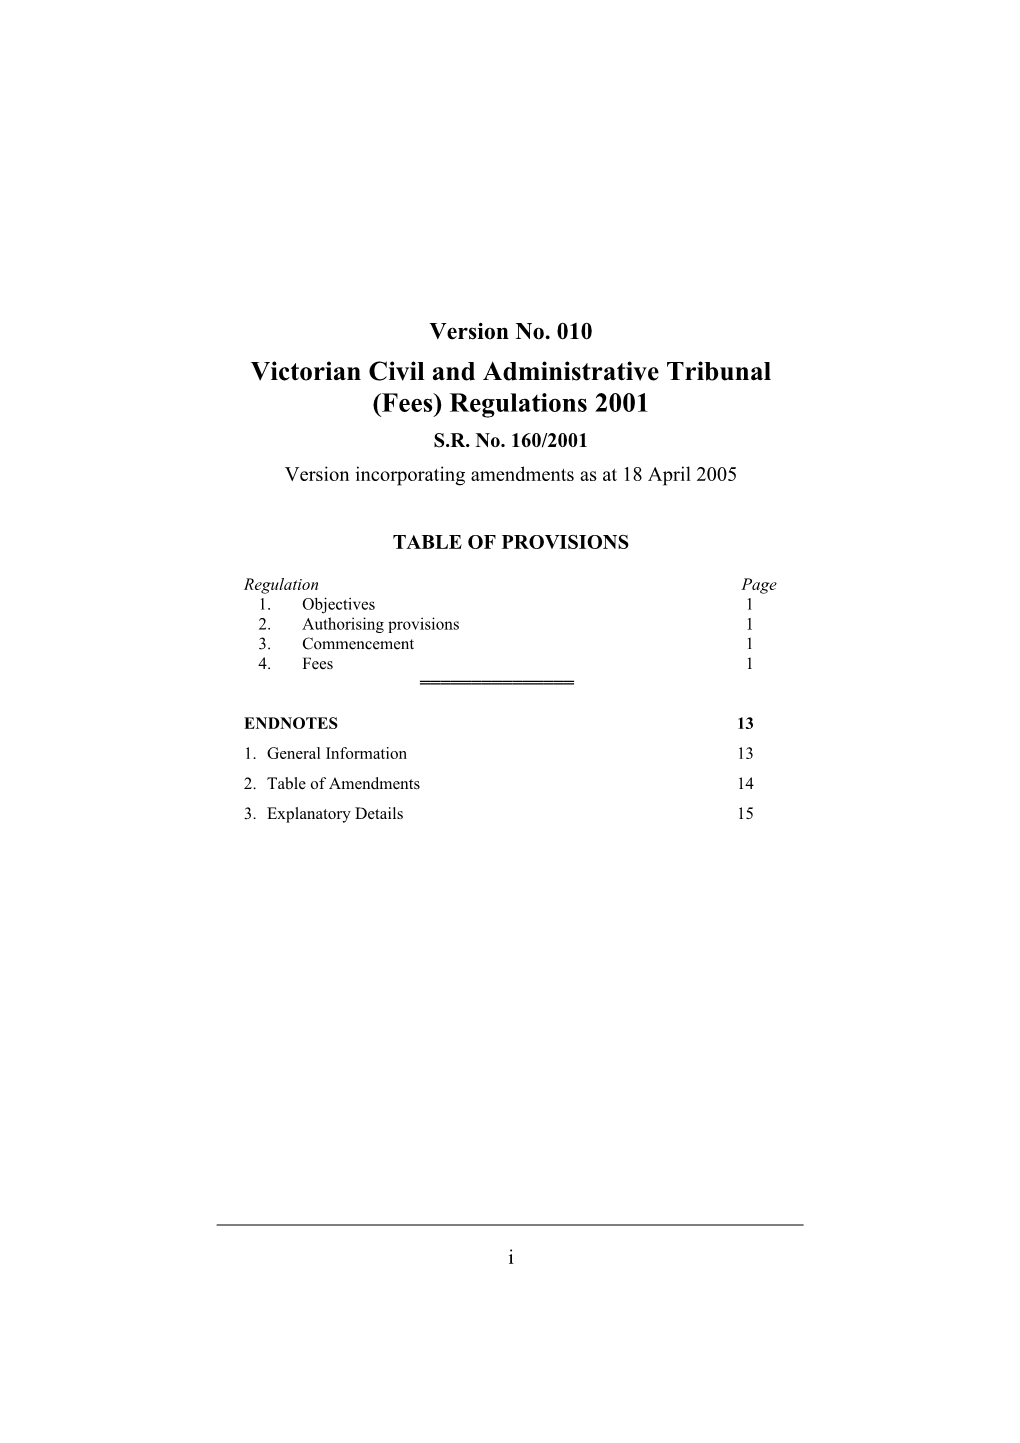 Victorian Civil and Administrative Tribunal (Fees) Regulations 2001